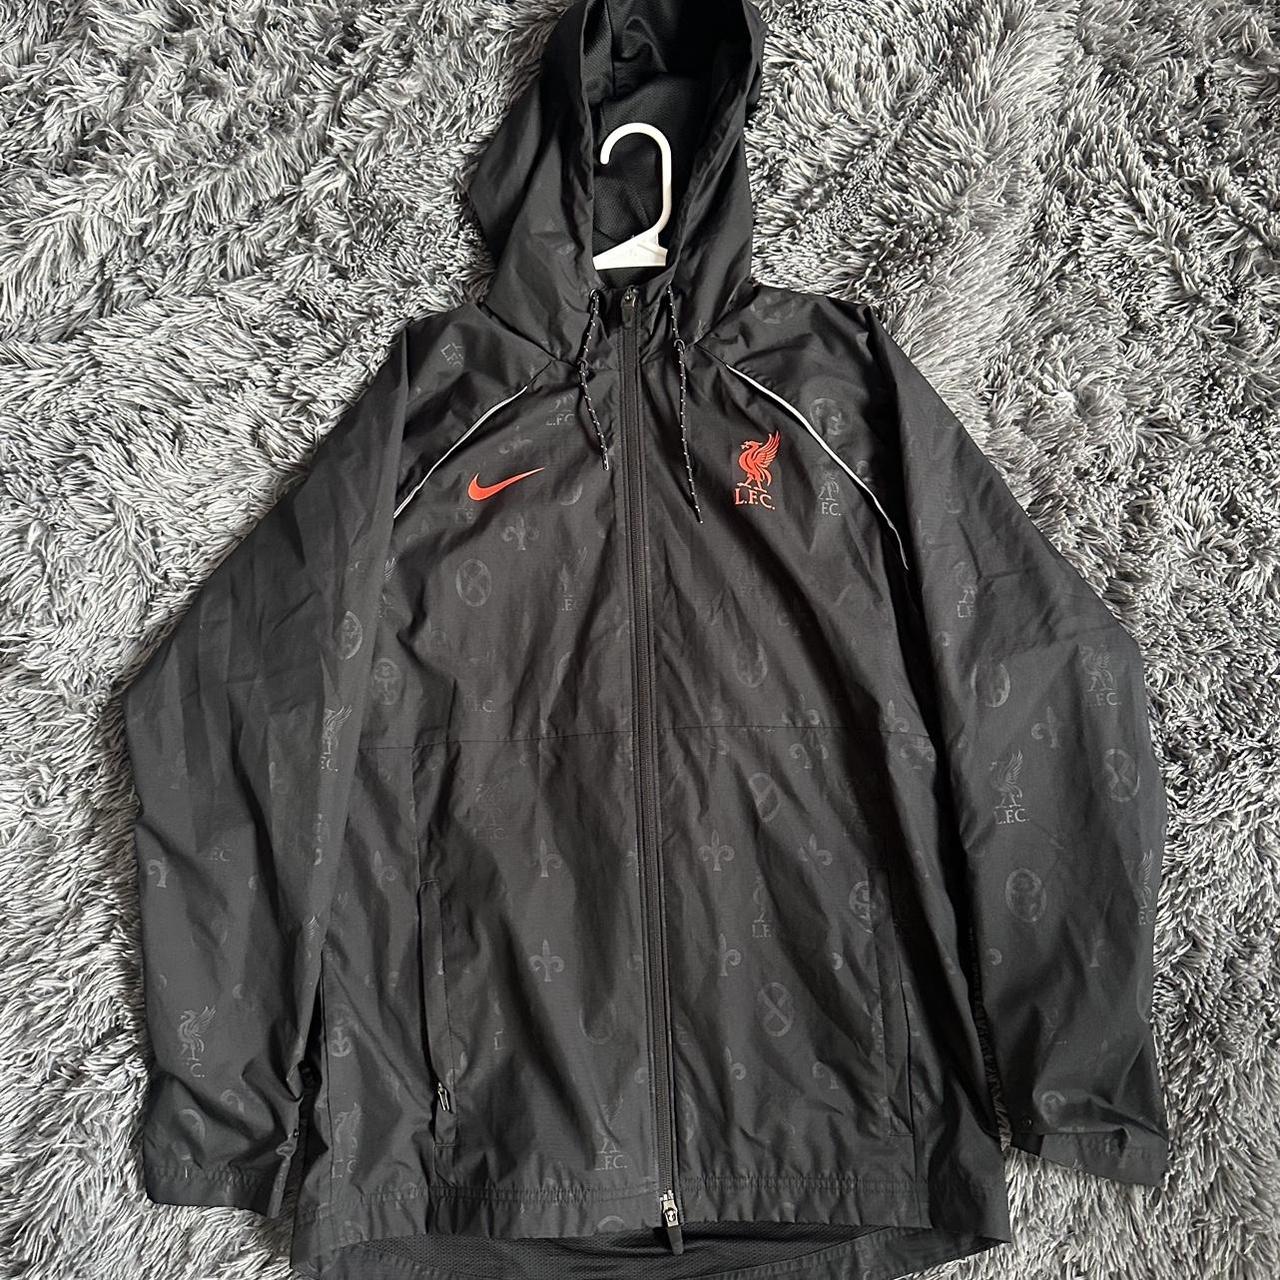 HUK Rain jacket Small stain on front - Depop